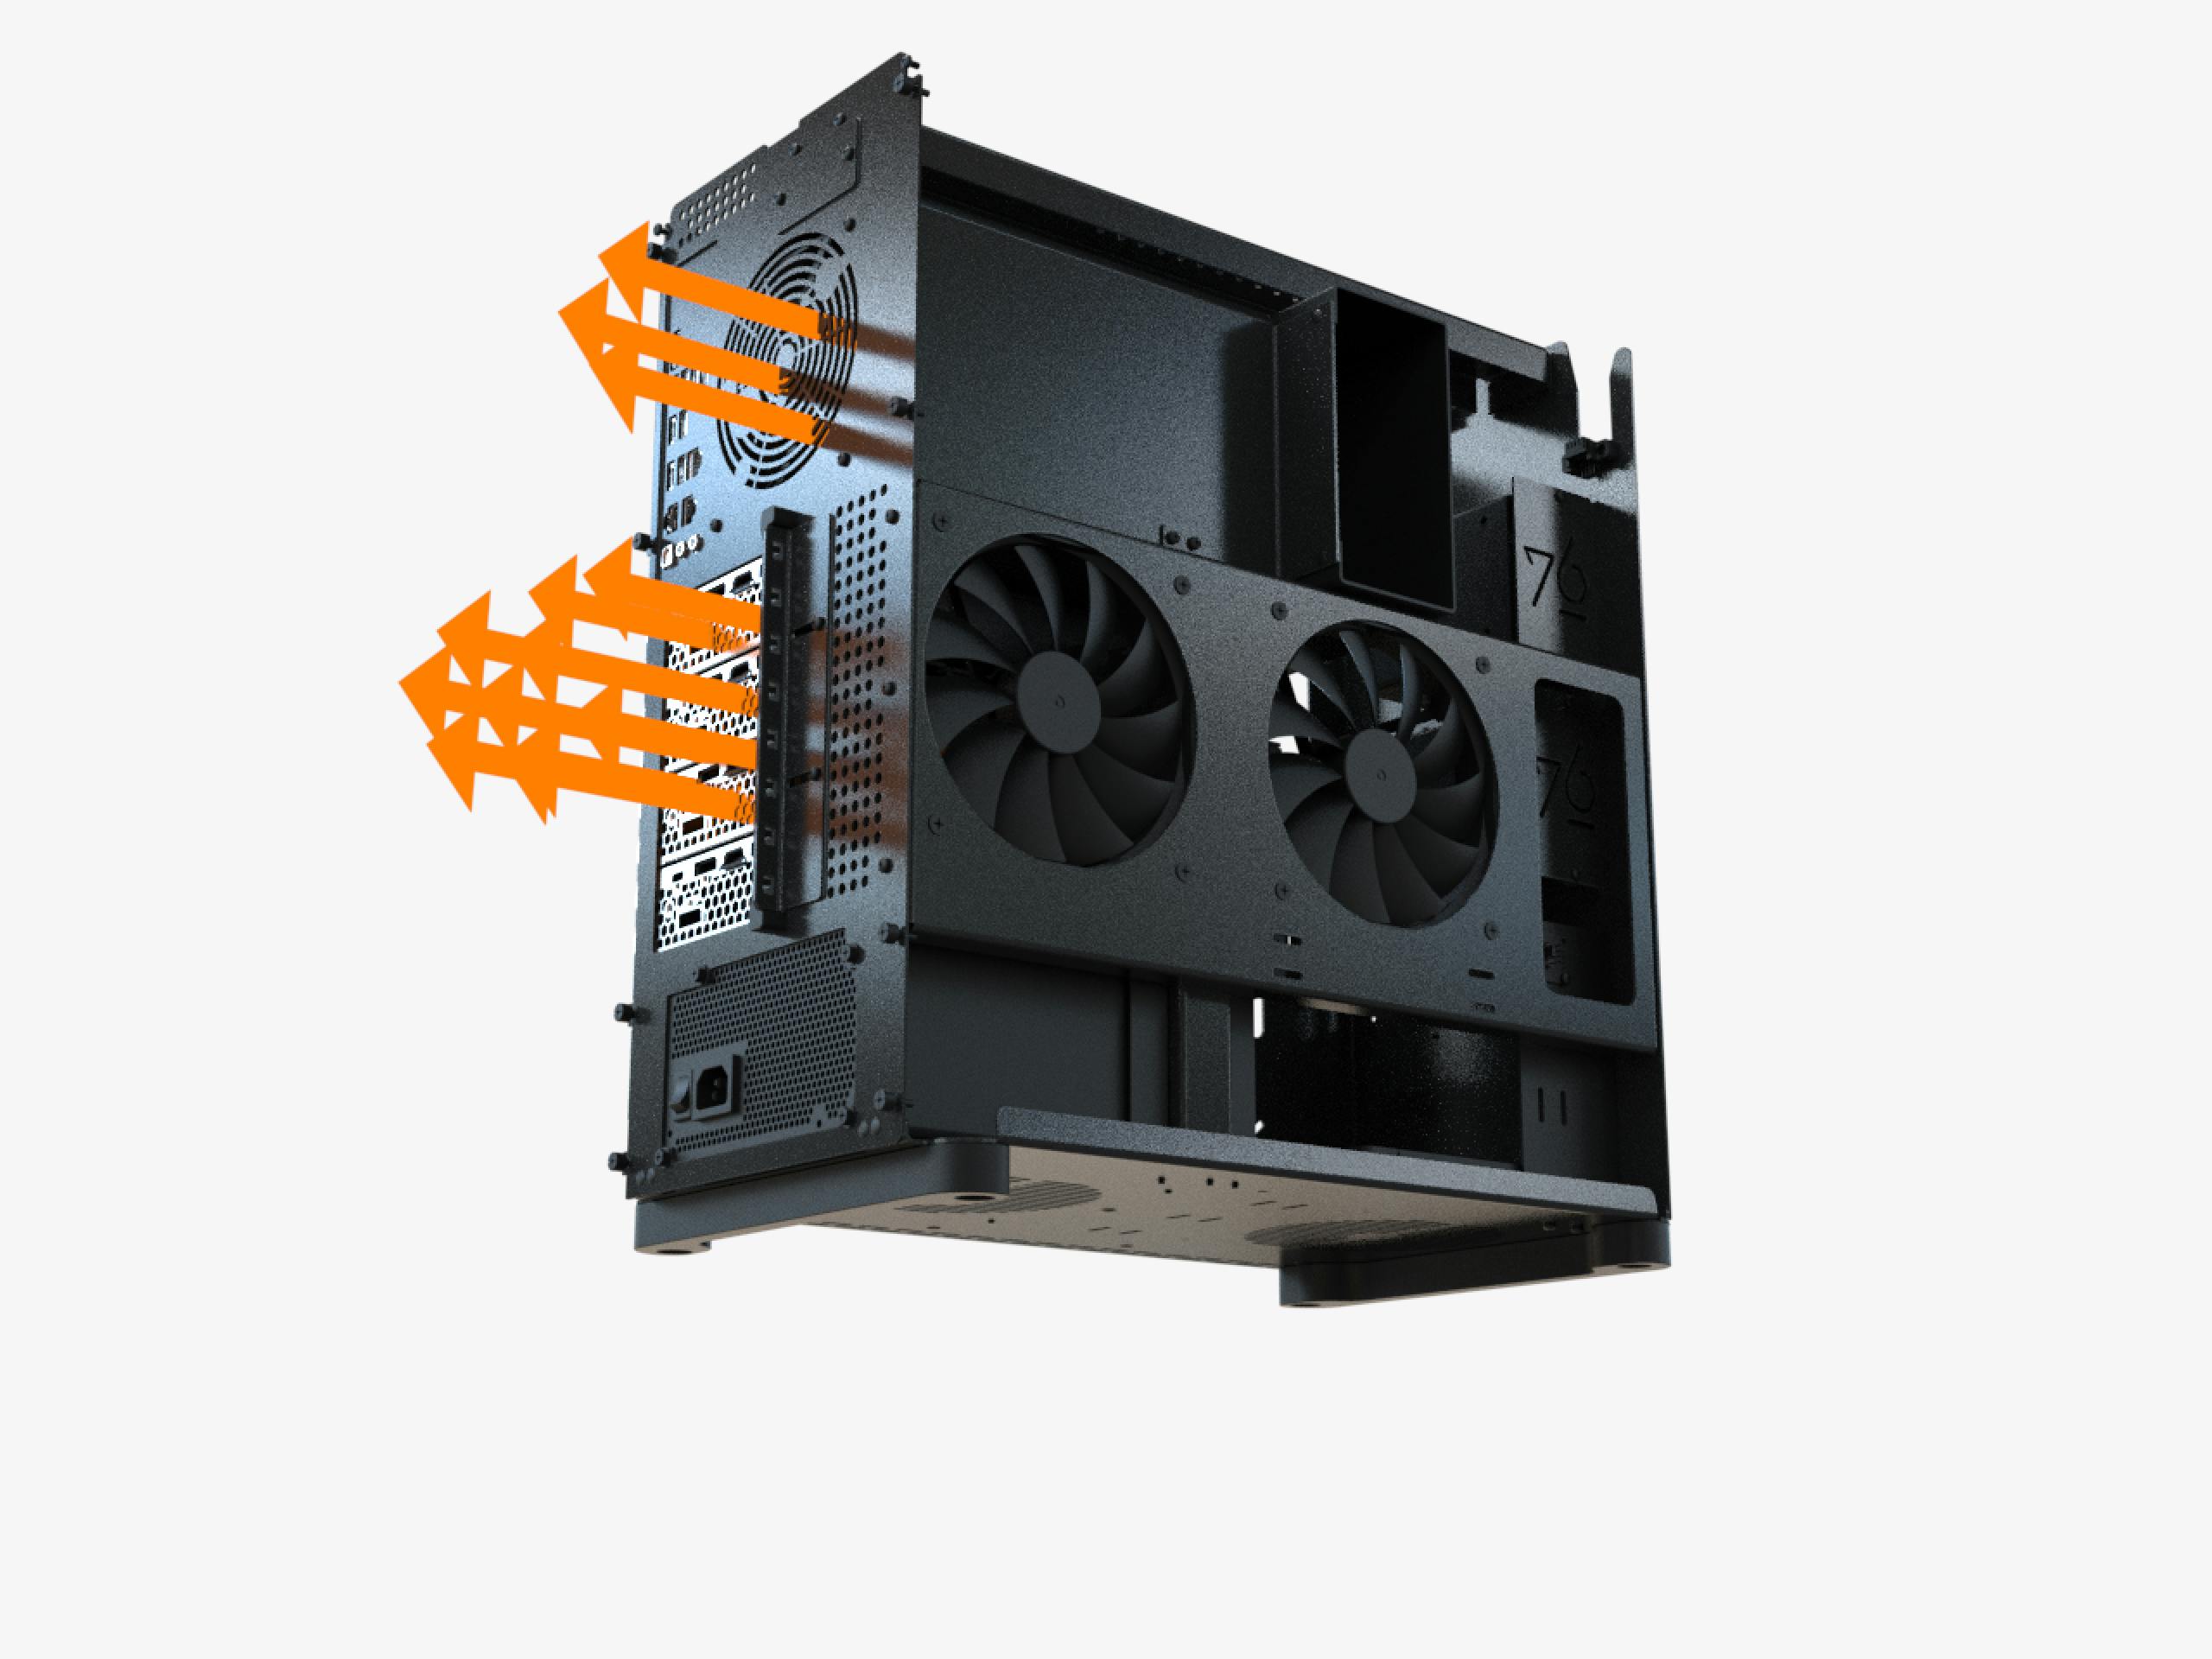 The air flows through the duct to cool the CPU, and is separated from the airflow cooling the GPU.